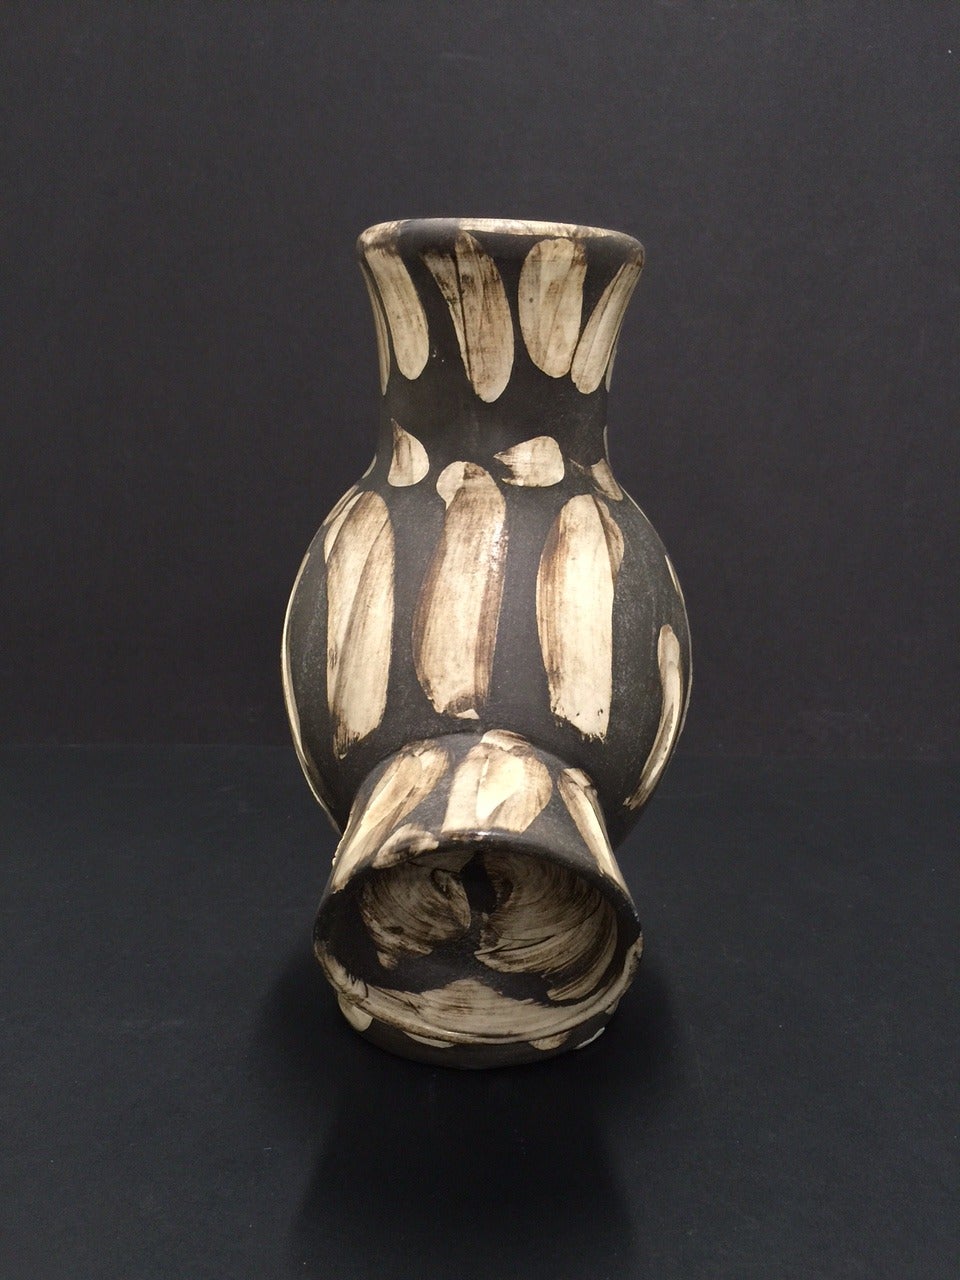 Original Pablo Picasso Ceramic Vase, made of white earthenware clay, hand - painted with black and brown.From the edition of 500. Inscribed Madoura/Edition Picasso on verso. 
(AR 605)